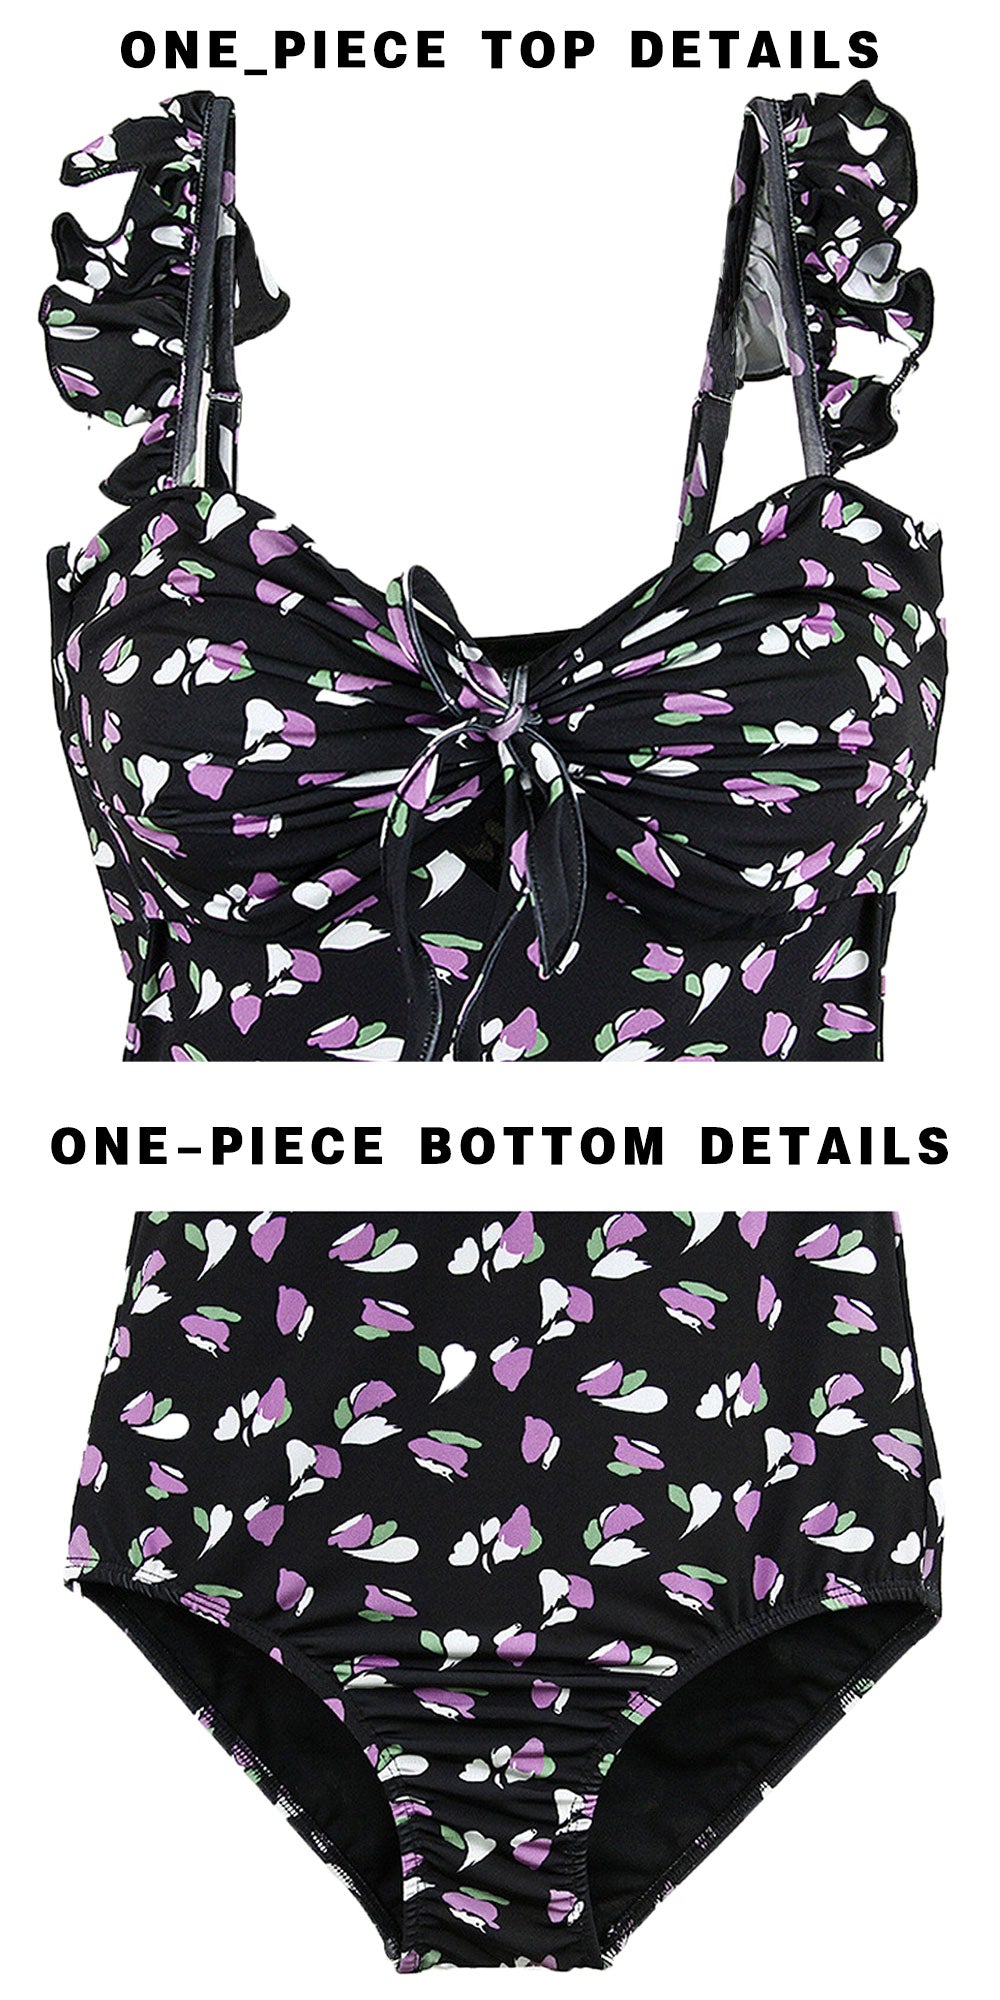 Upopby Fashion Floral Print Backless One-Piece Swimsuit Details